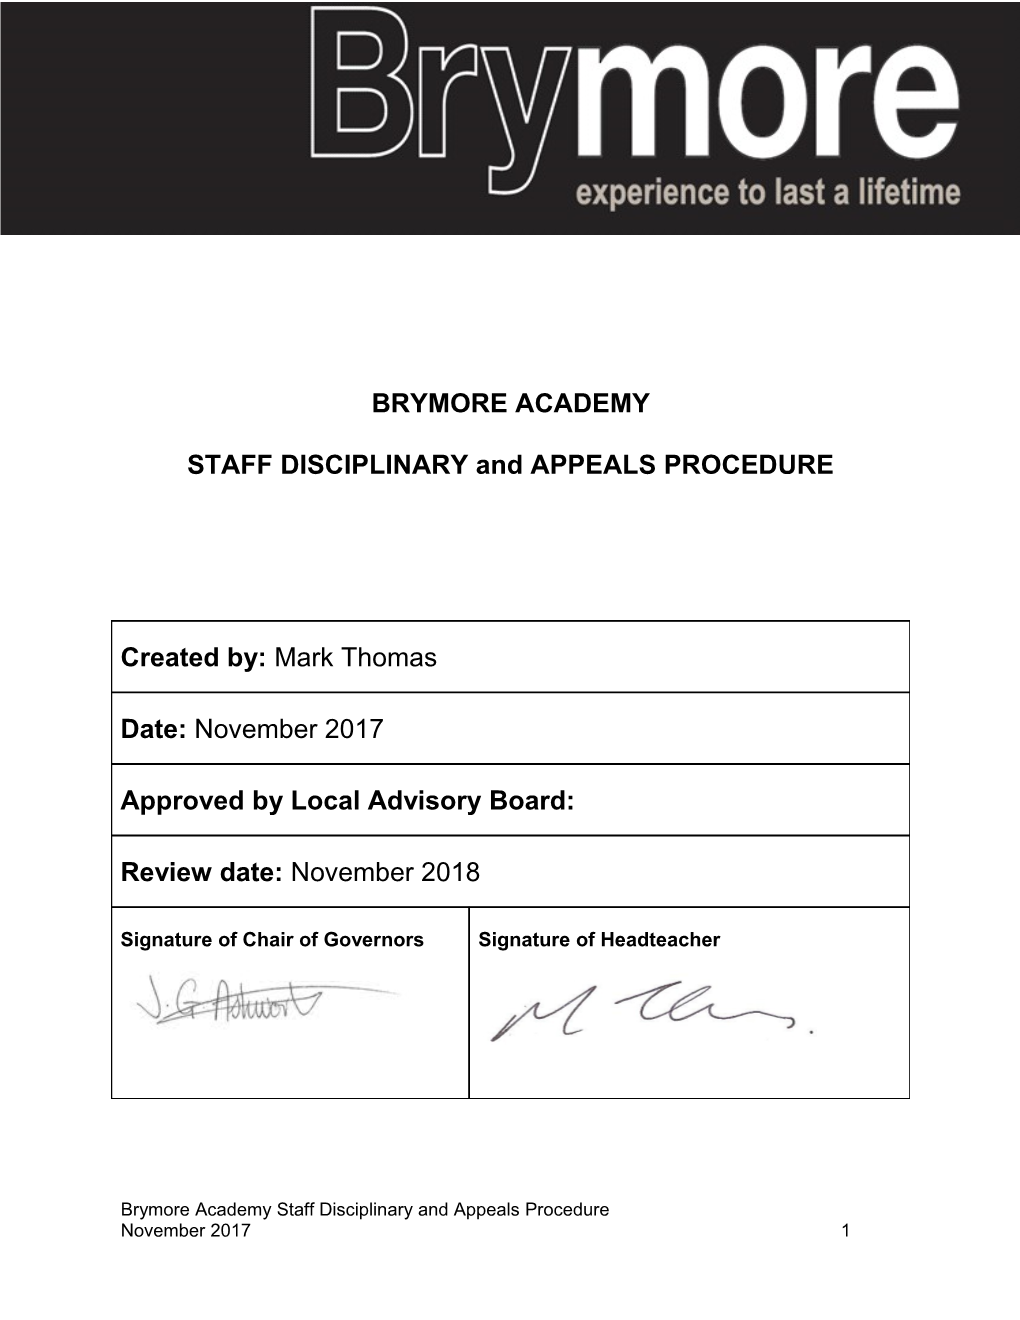 STAFF DISCIPLINARY and APPEALS PROCEDURE